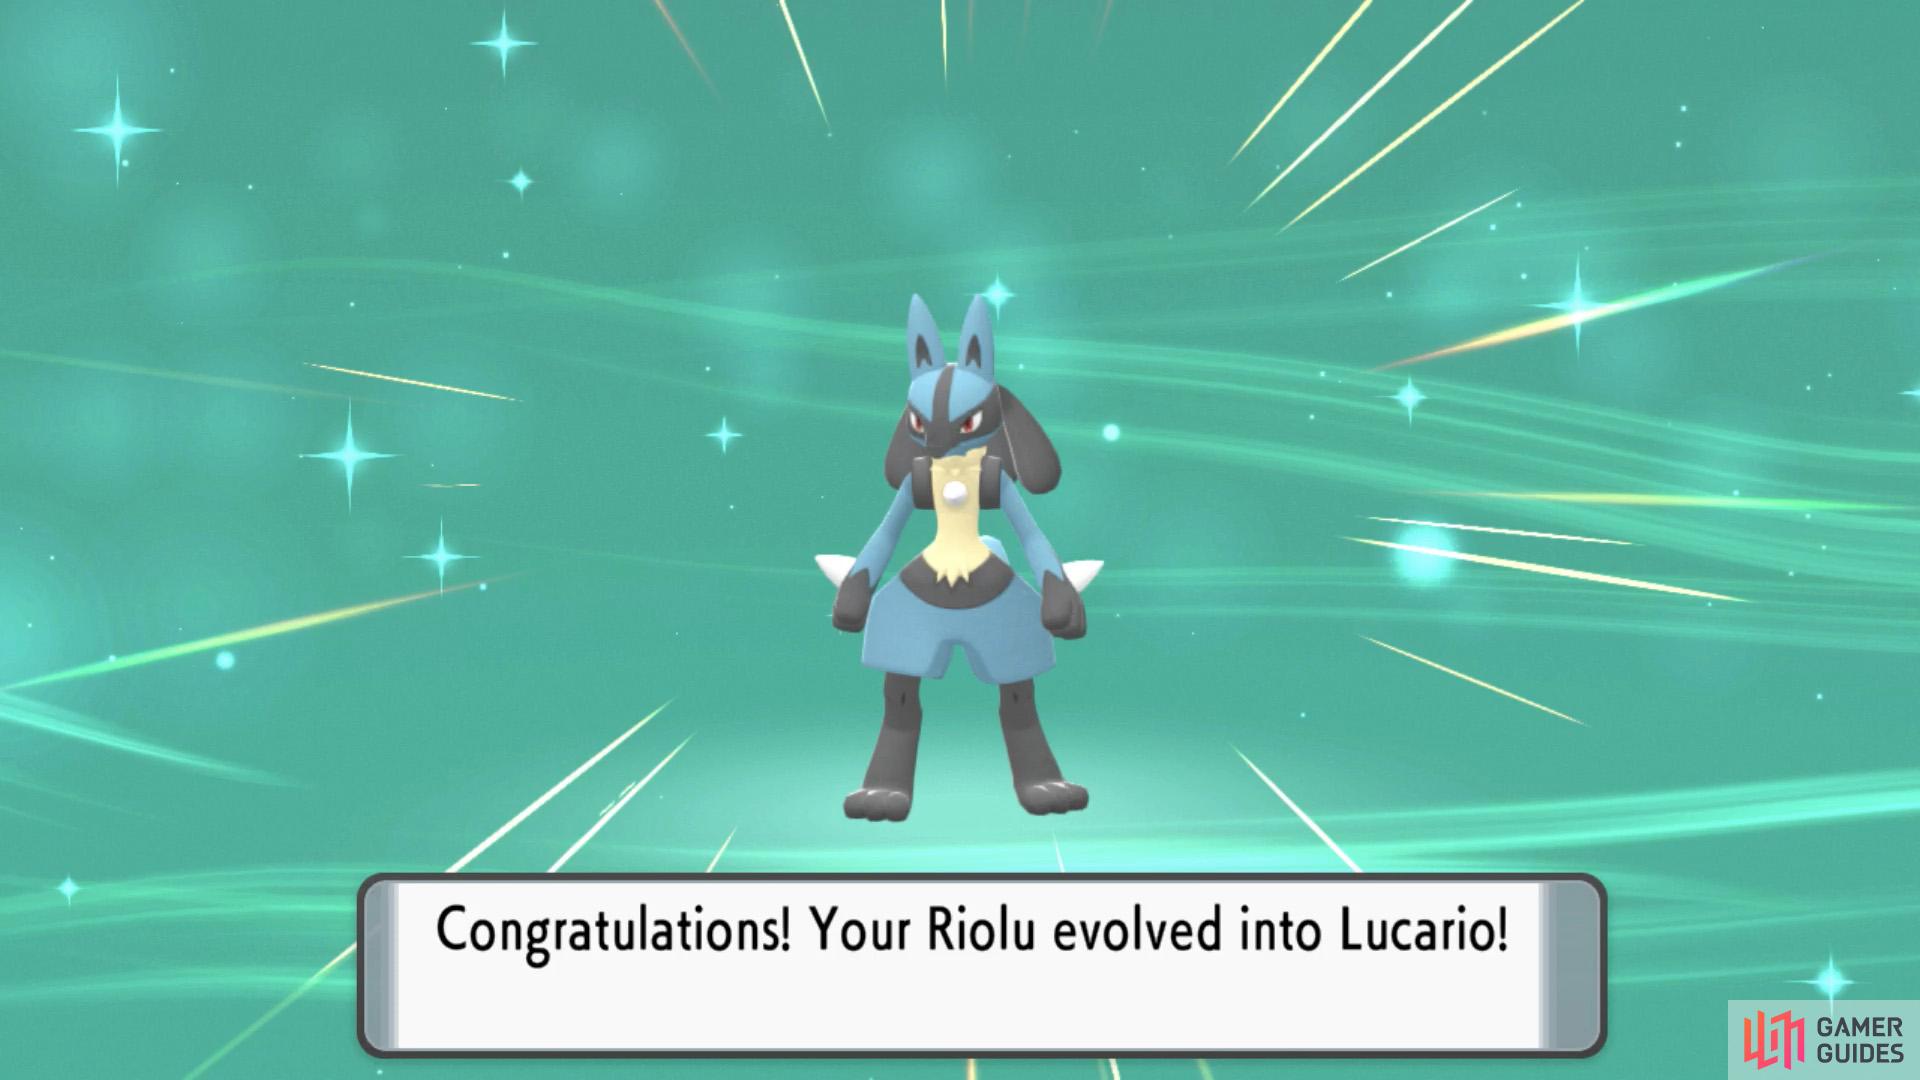 You can get your own Lucario like Riley!